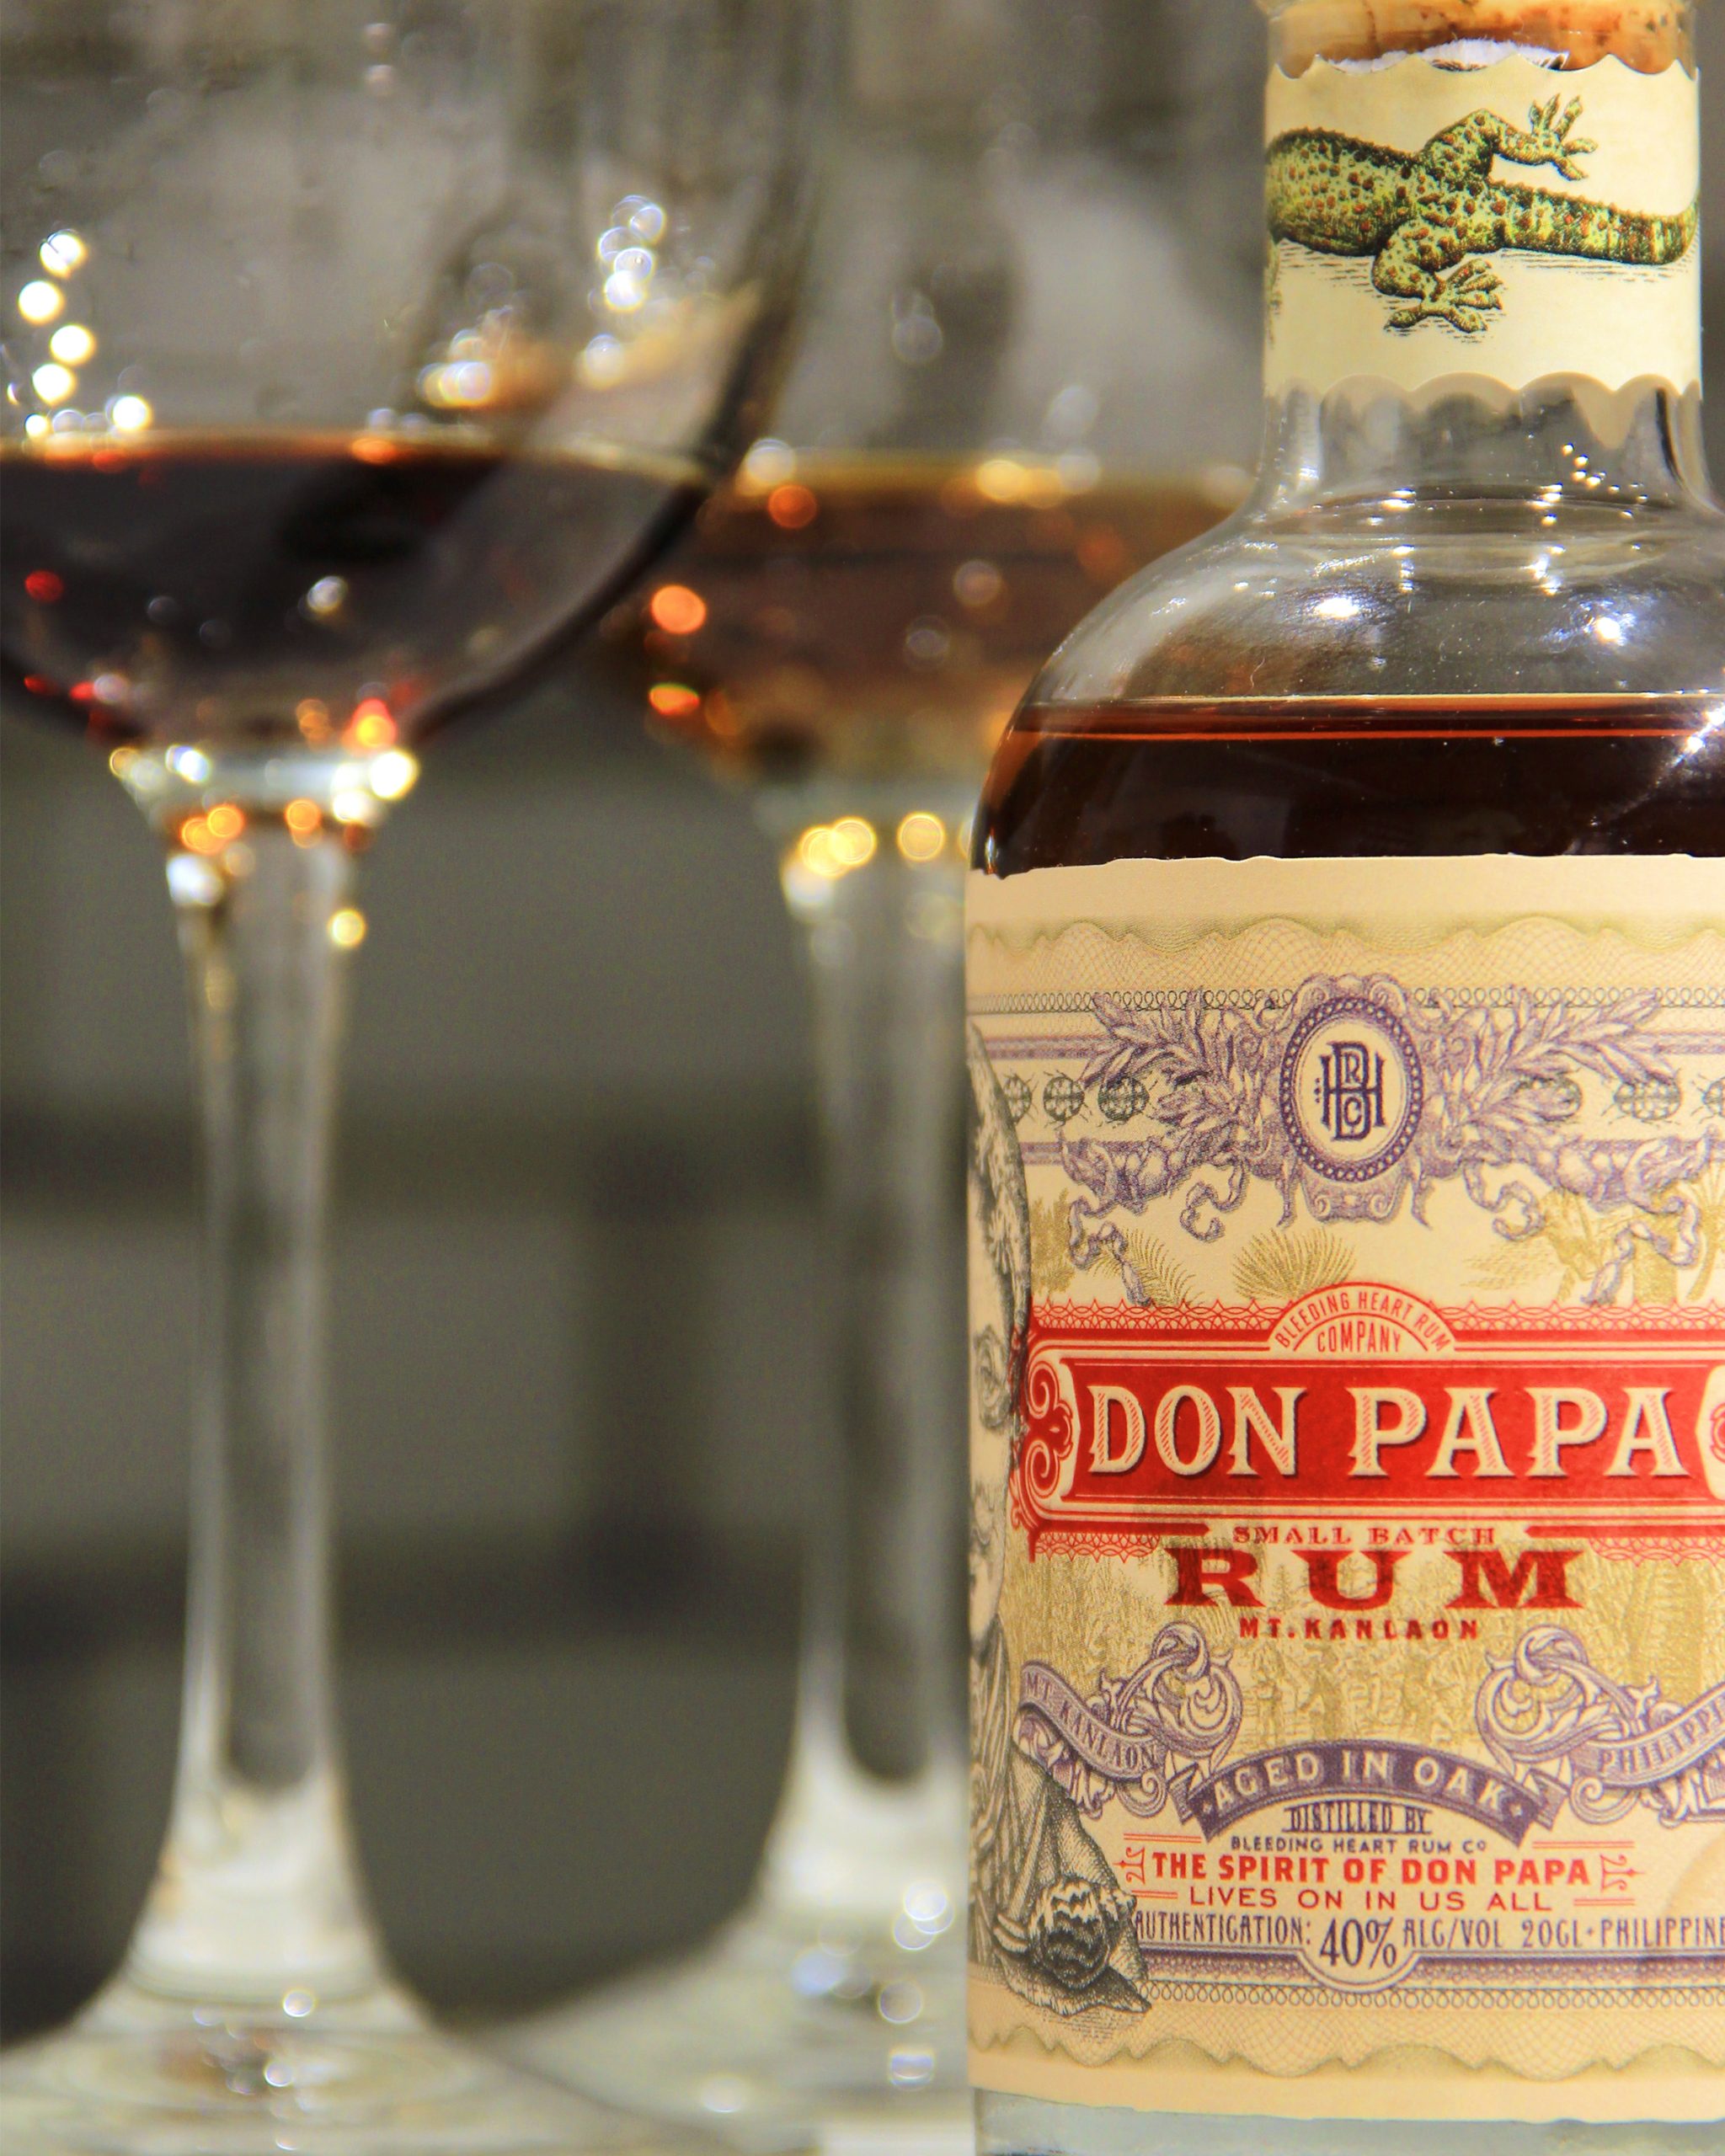 Closeup shot of a bottle of Don Papa Rum, with two wine glasses blurred in front of a grey brick backdrop.